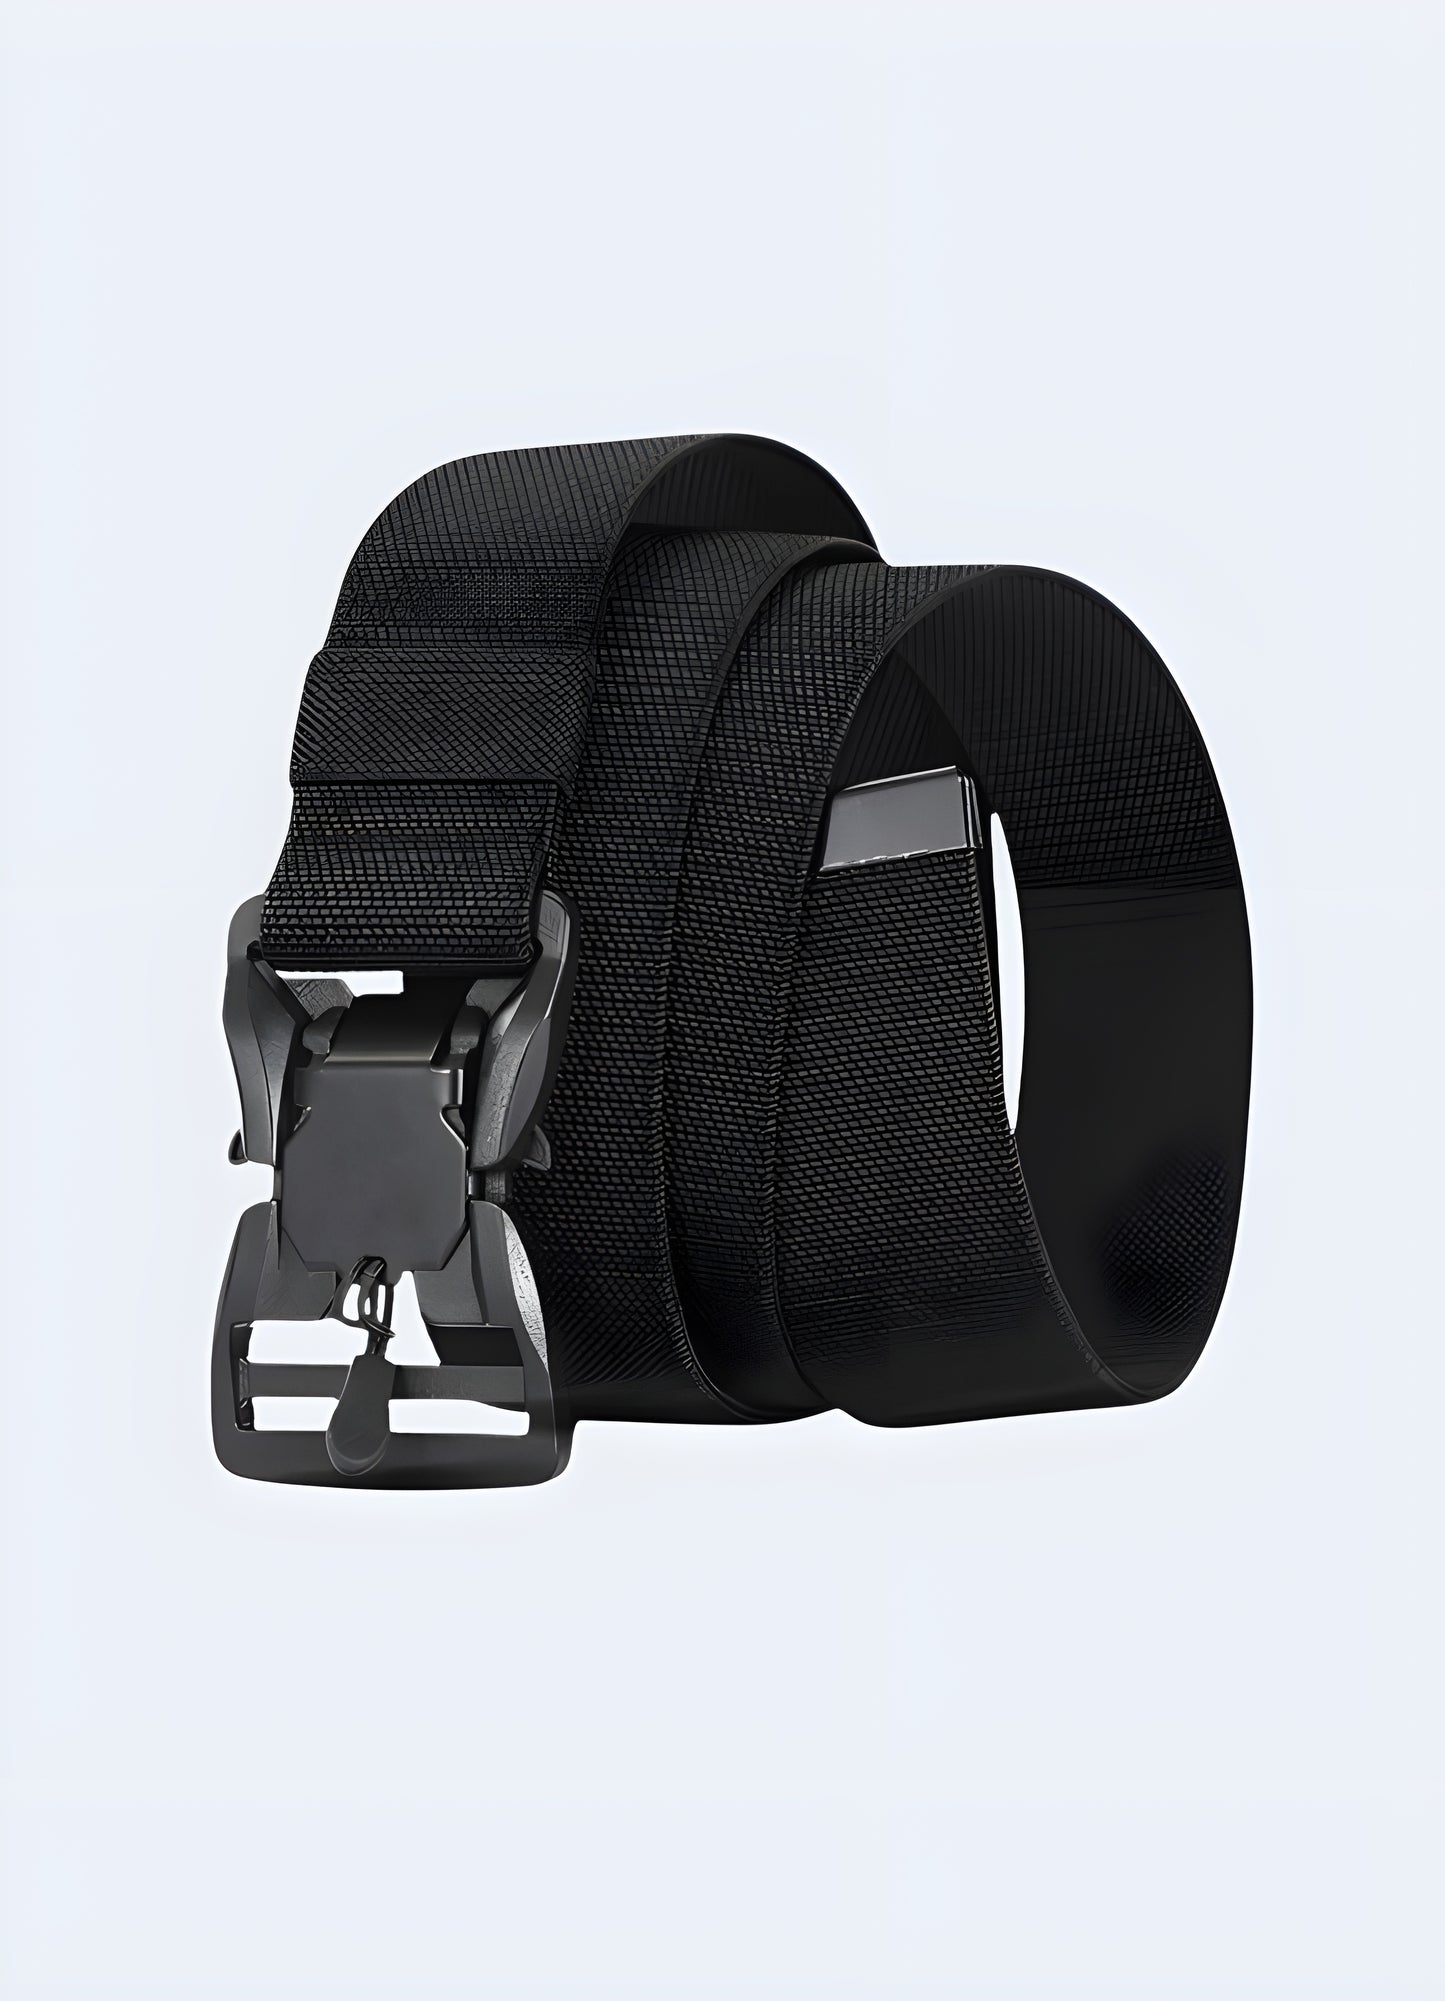 This belt is designed to endure the demands of both the urban environment and the wild.